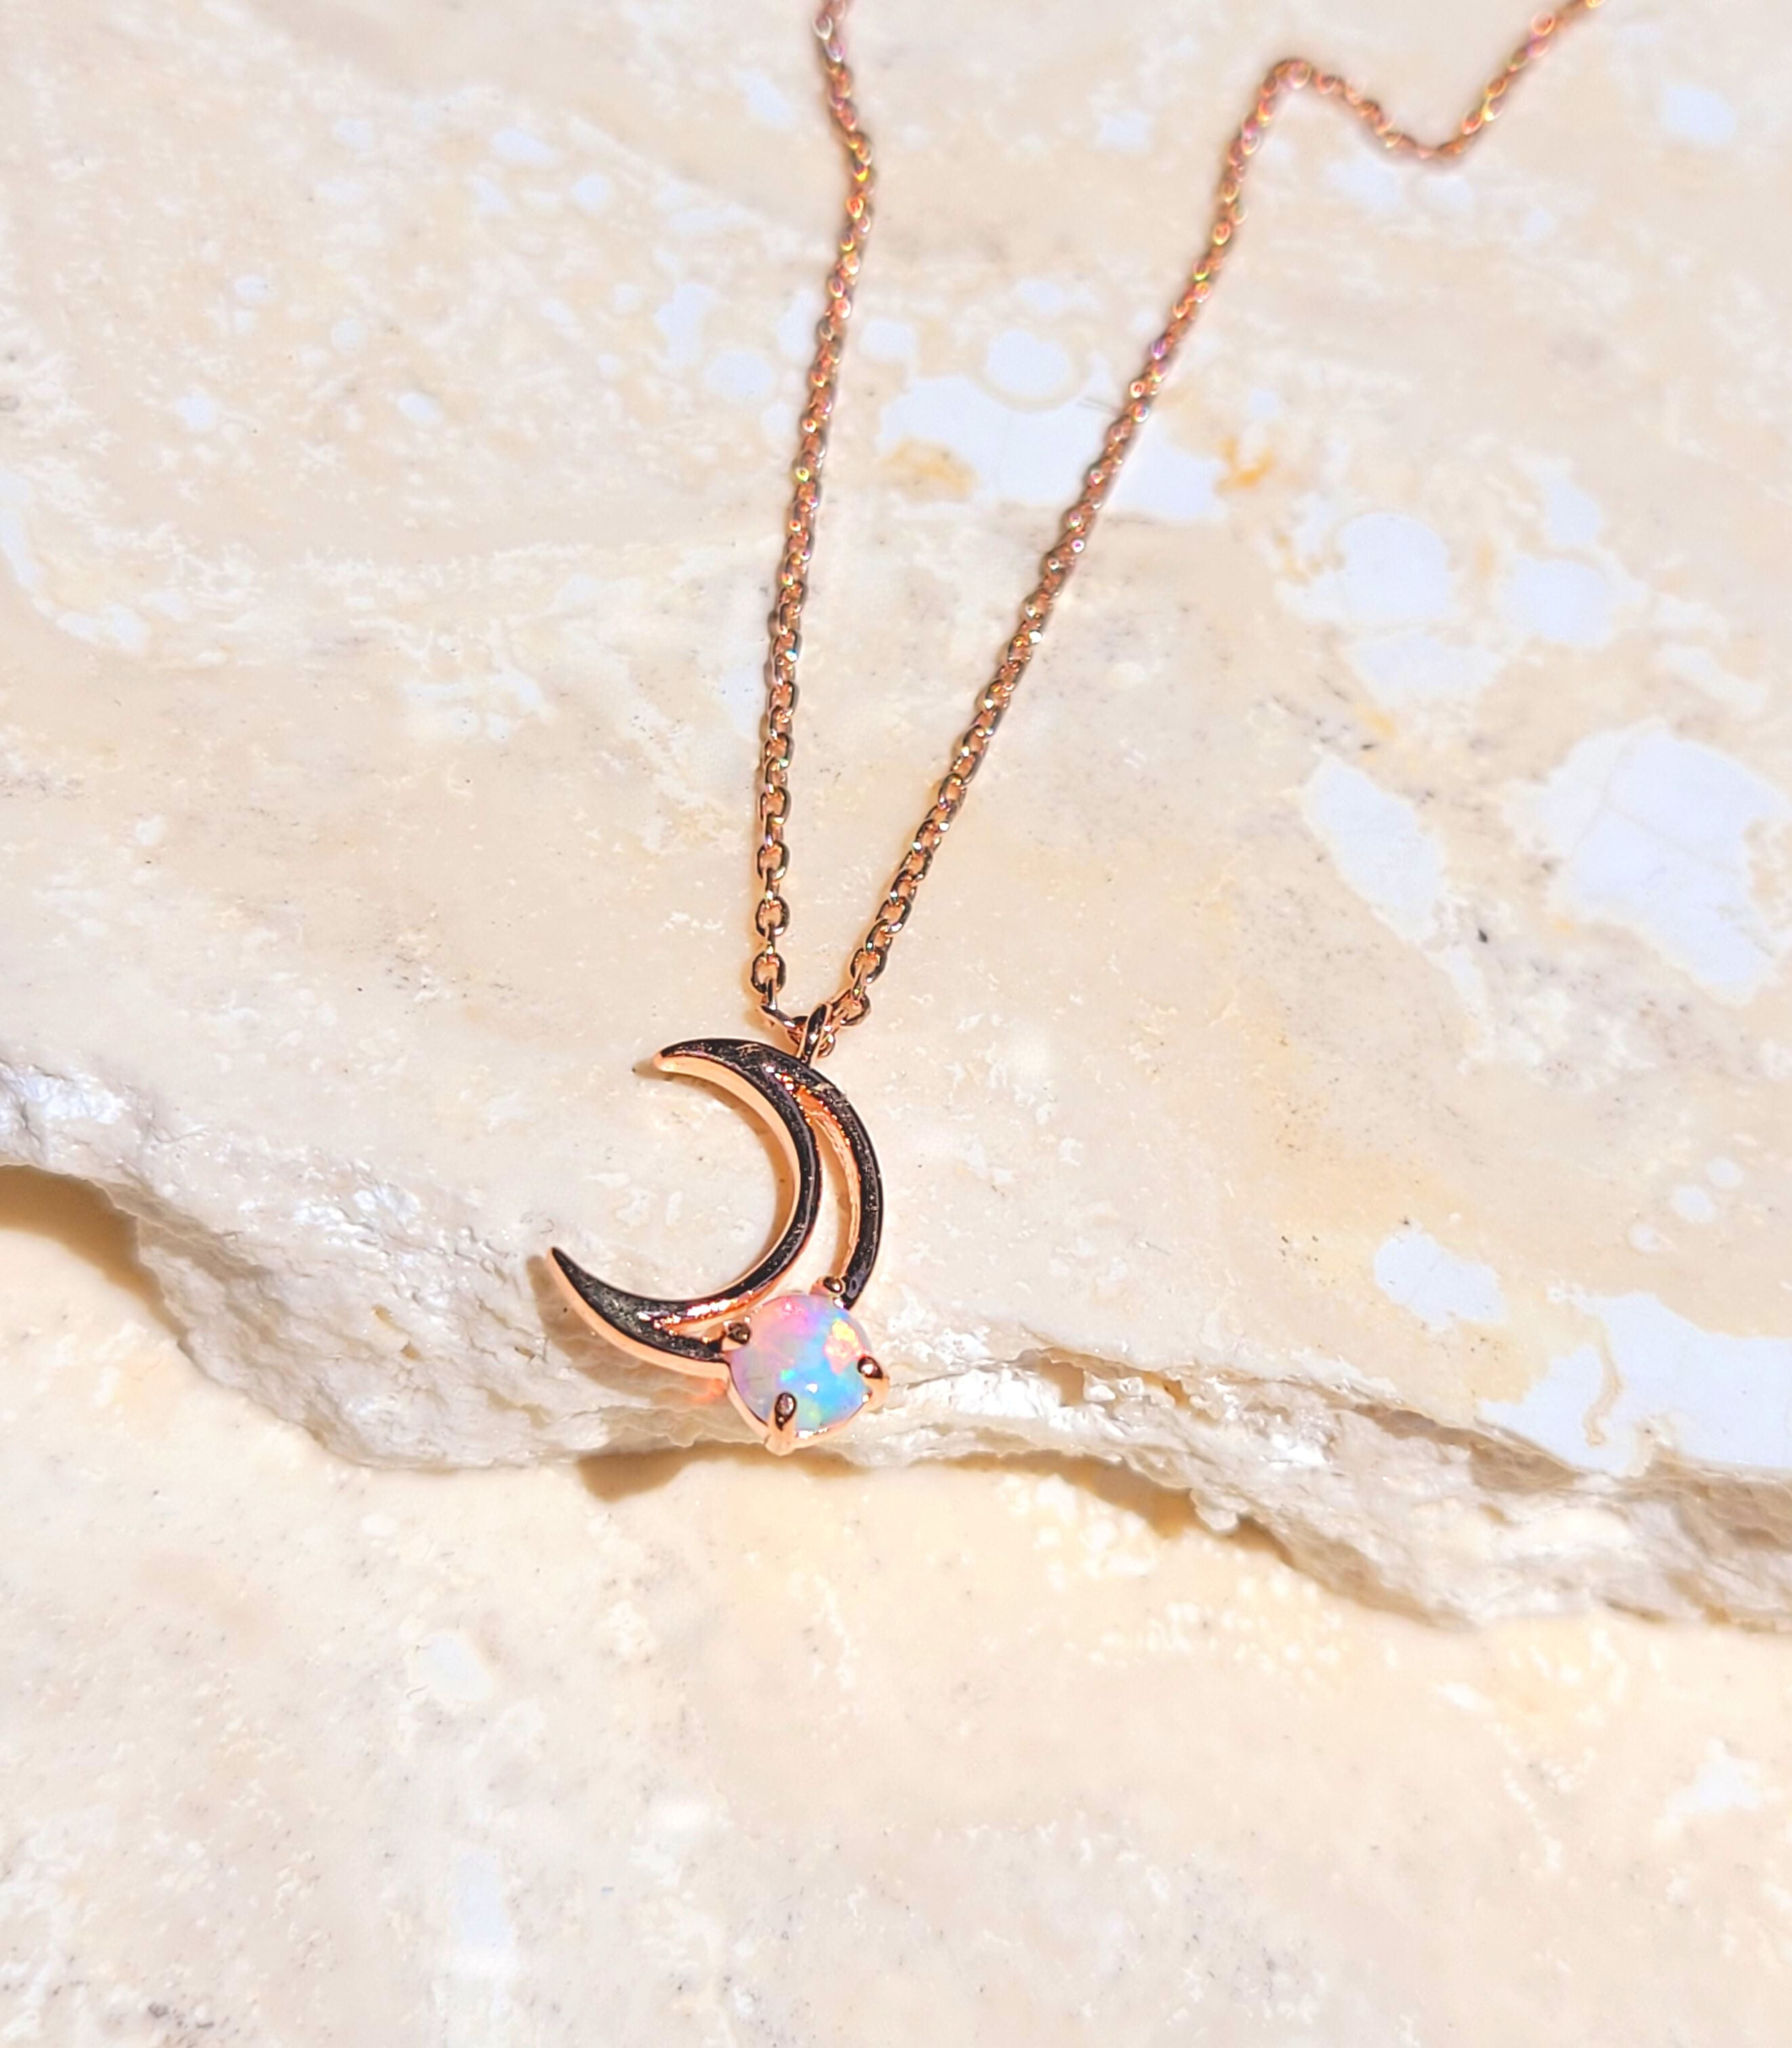 Rose gold opal moon necklace